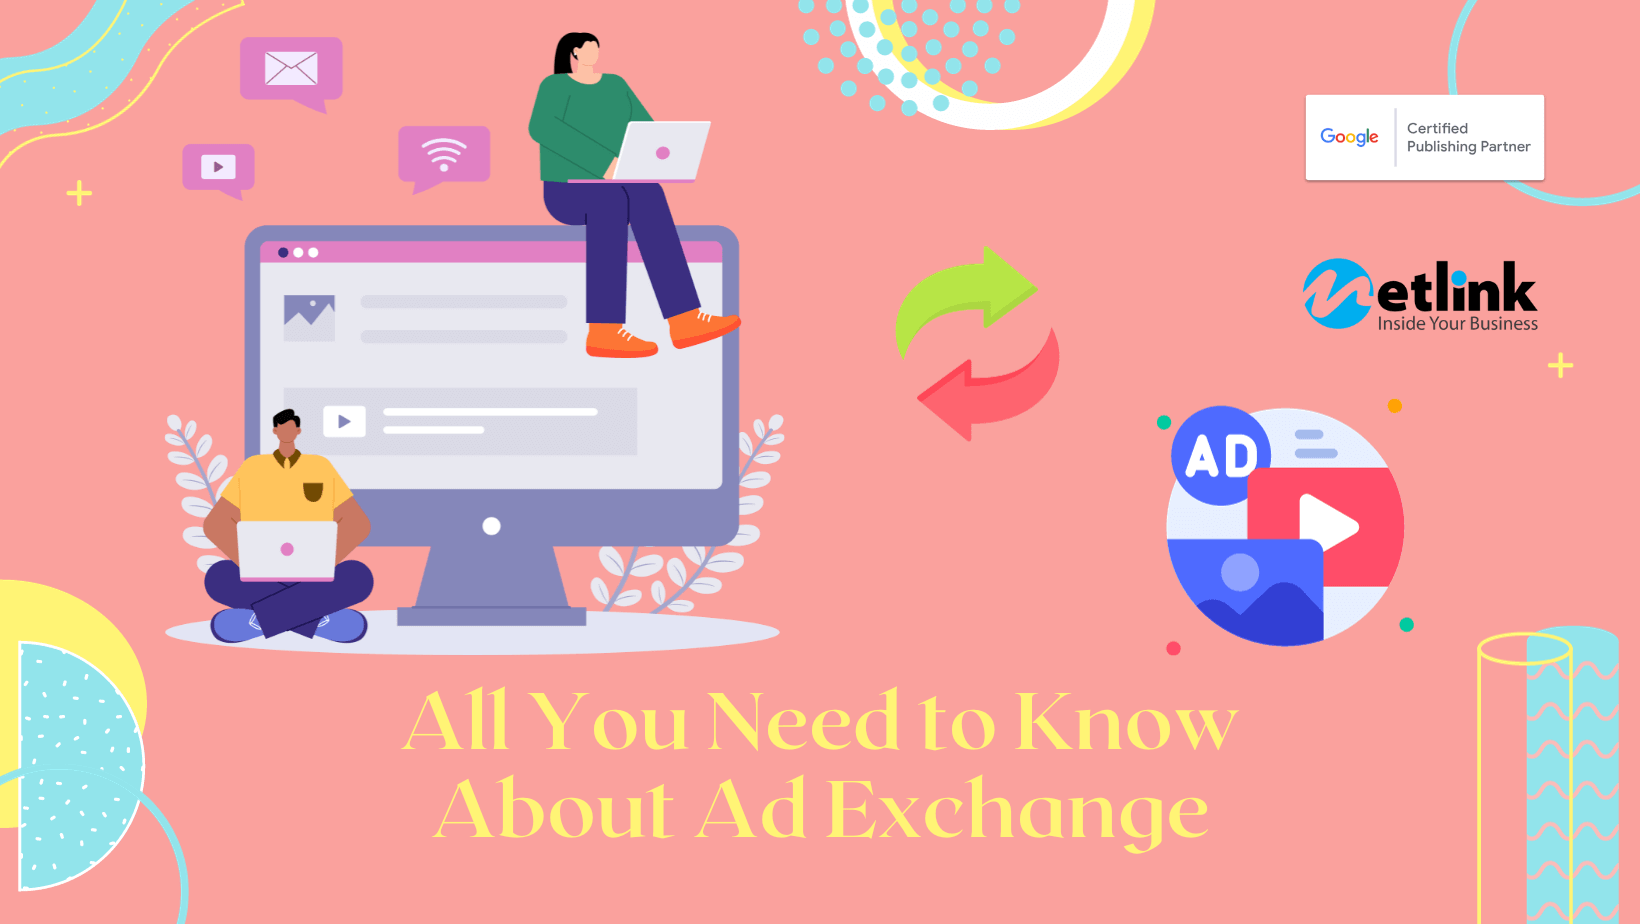 All you need to know Ad Exchange